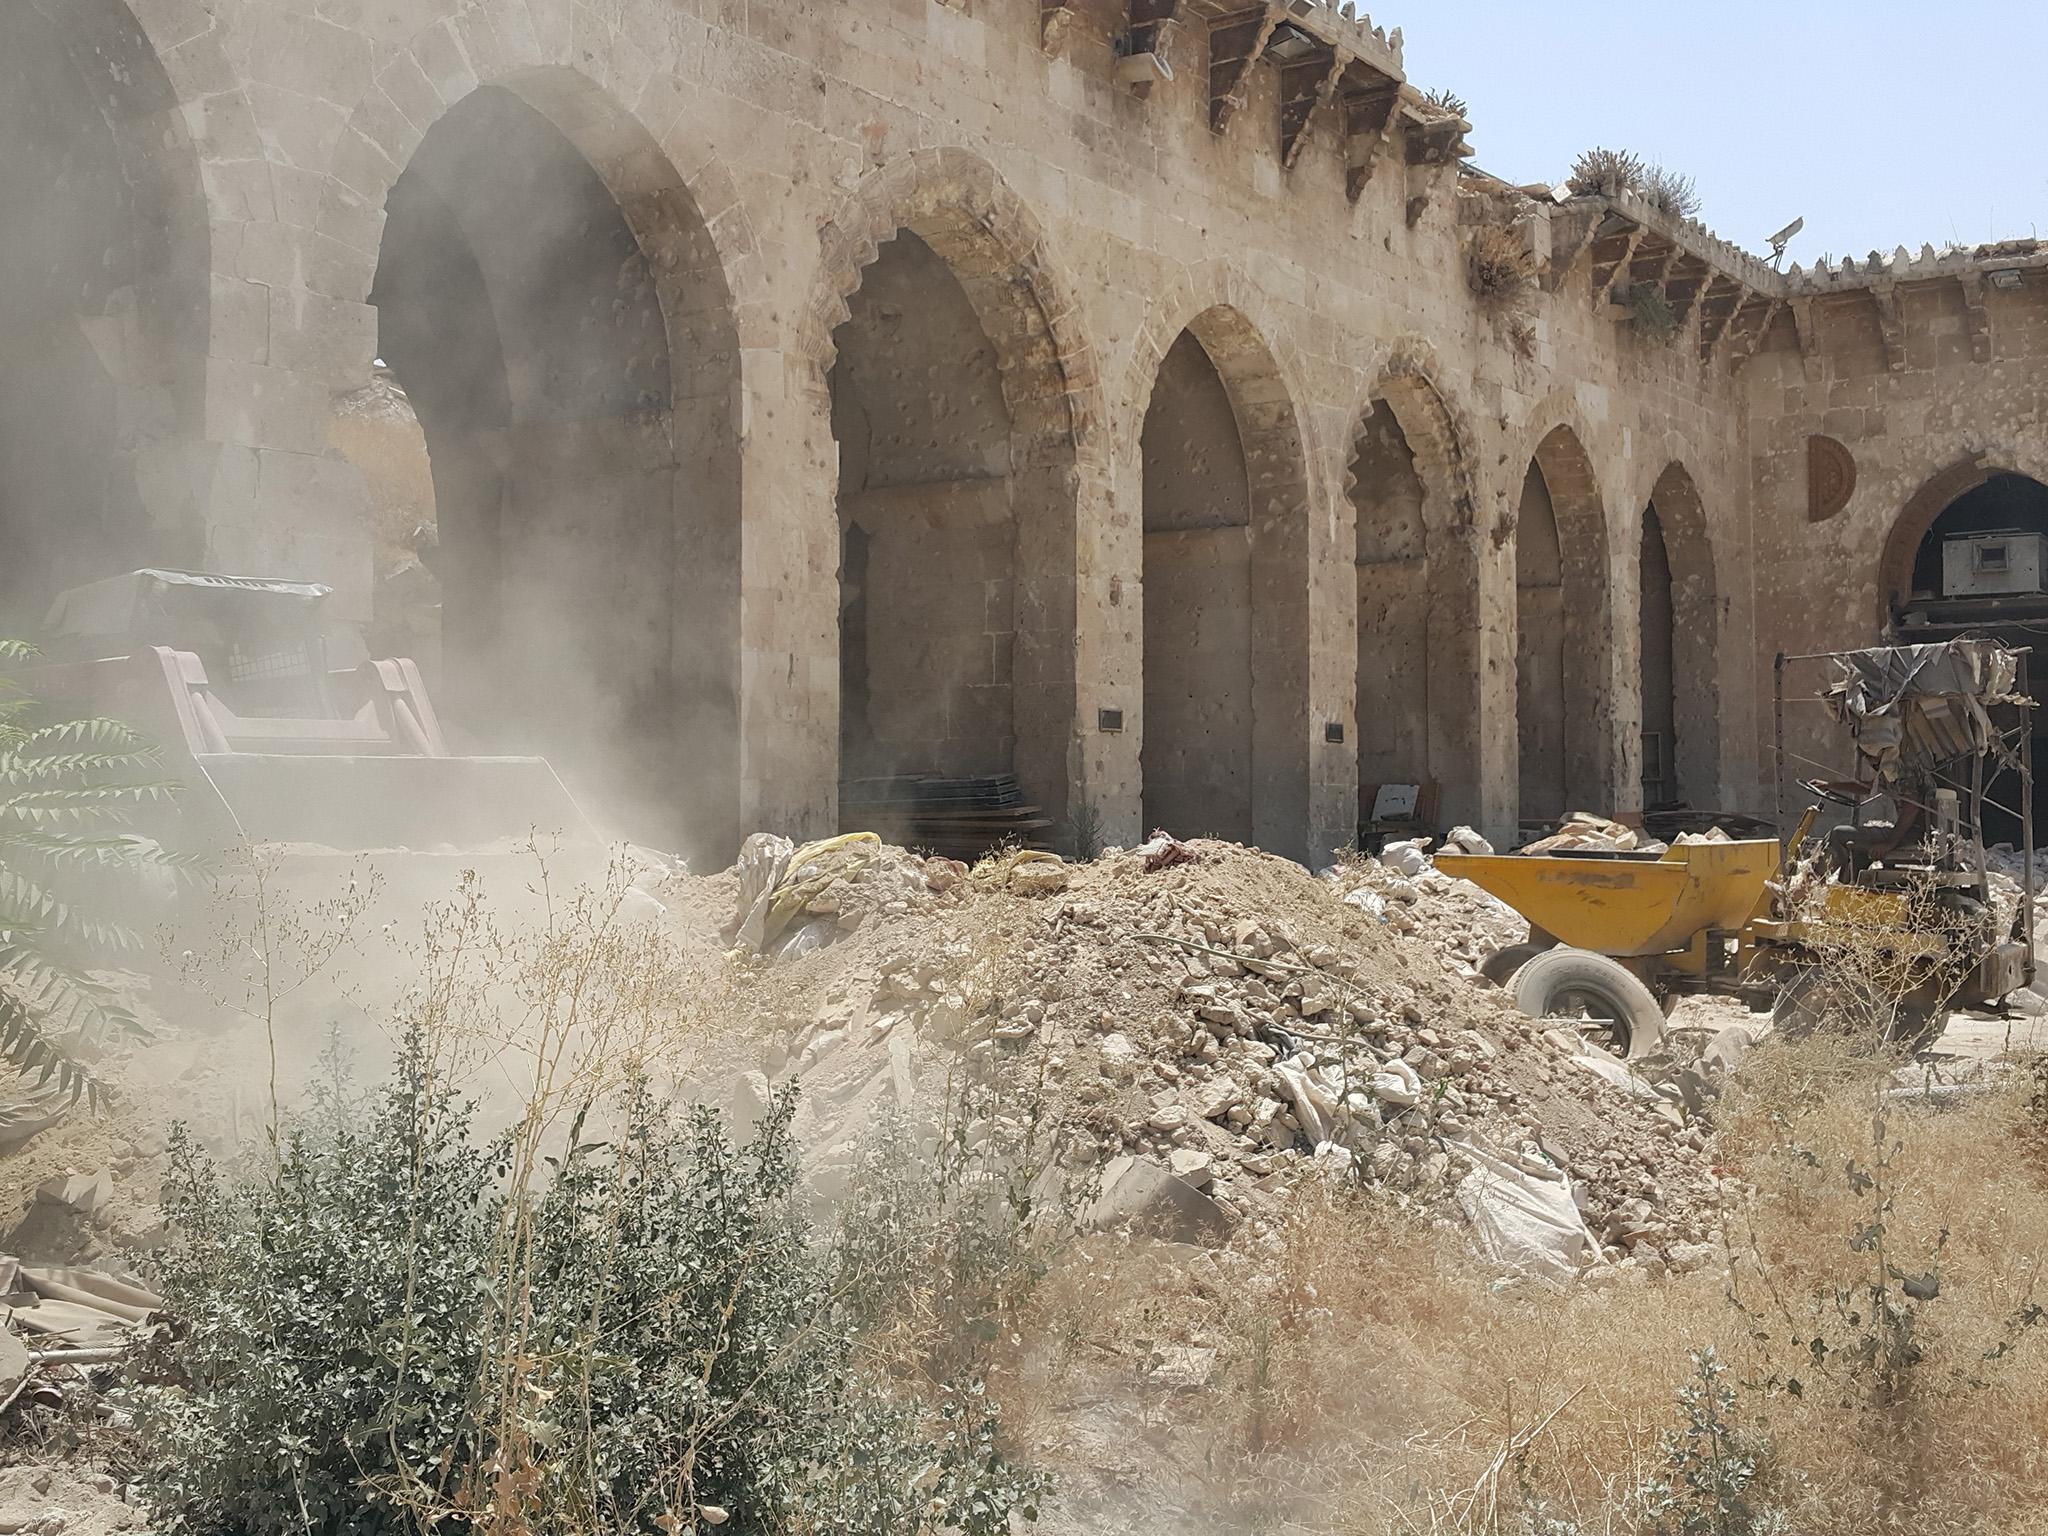 &#13;
Digger clearing stones from the courtyard of the Aleppo Umayyad Great Mosque (Photo: Nelofer Pazira)&#13;